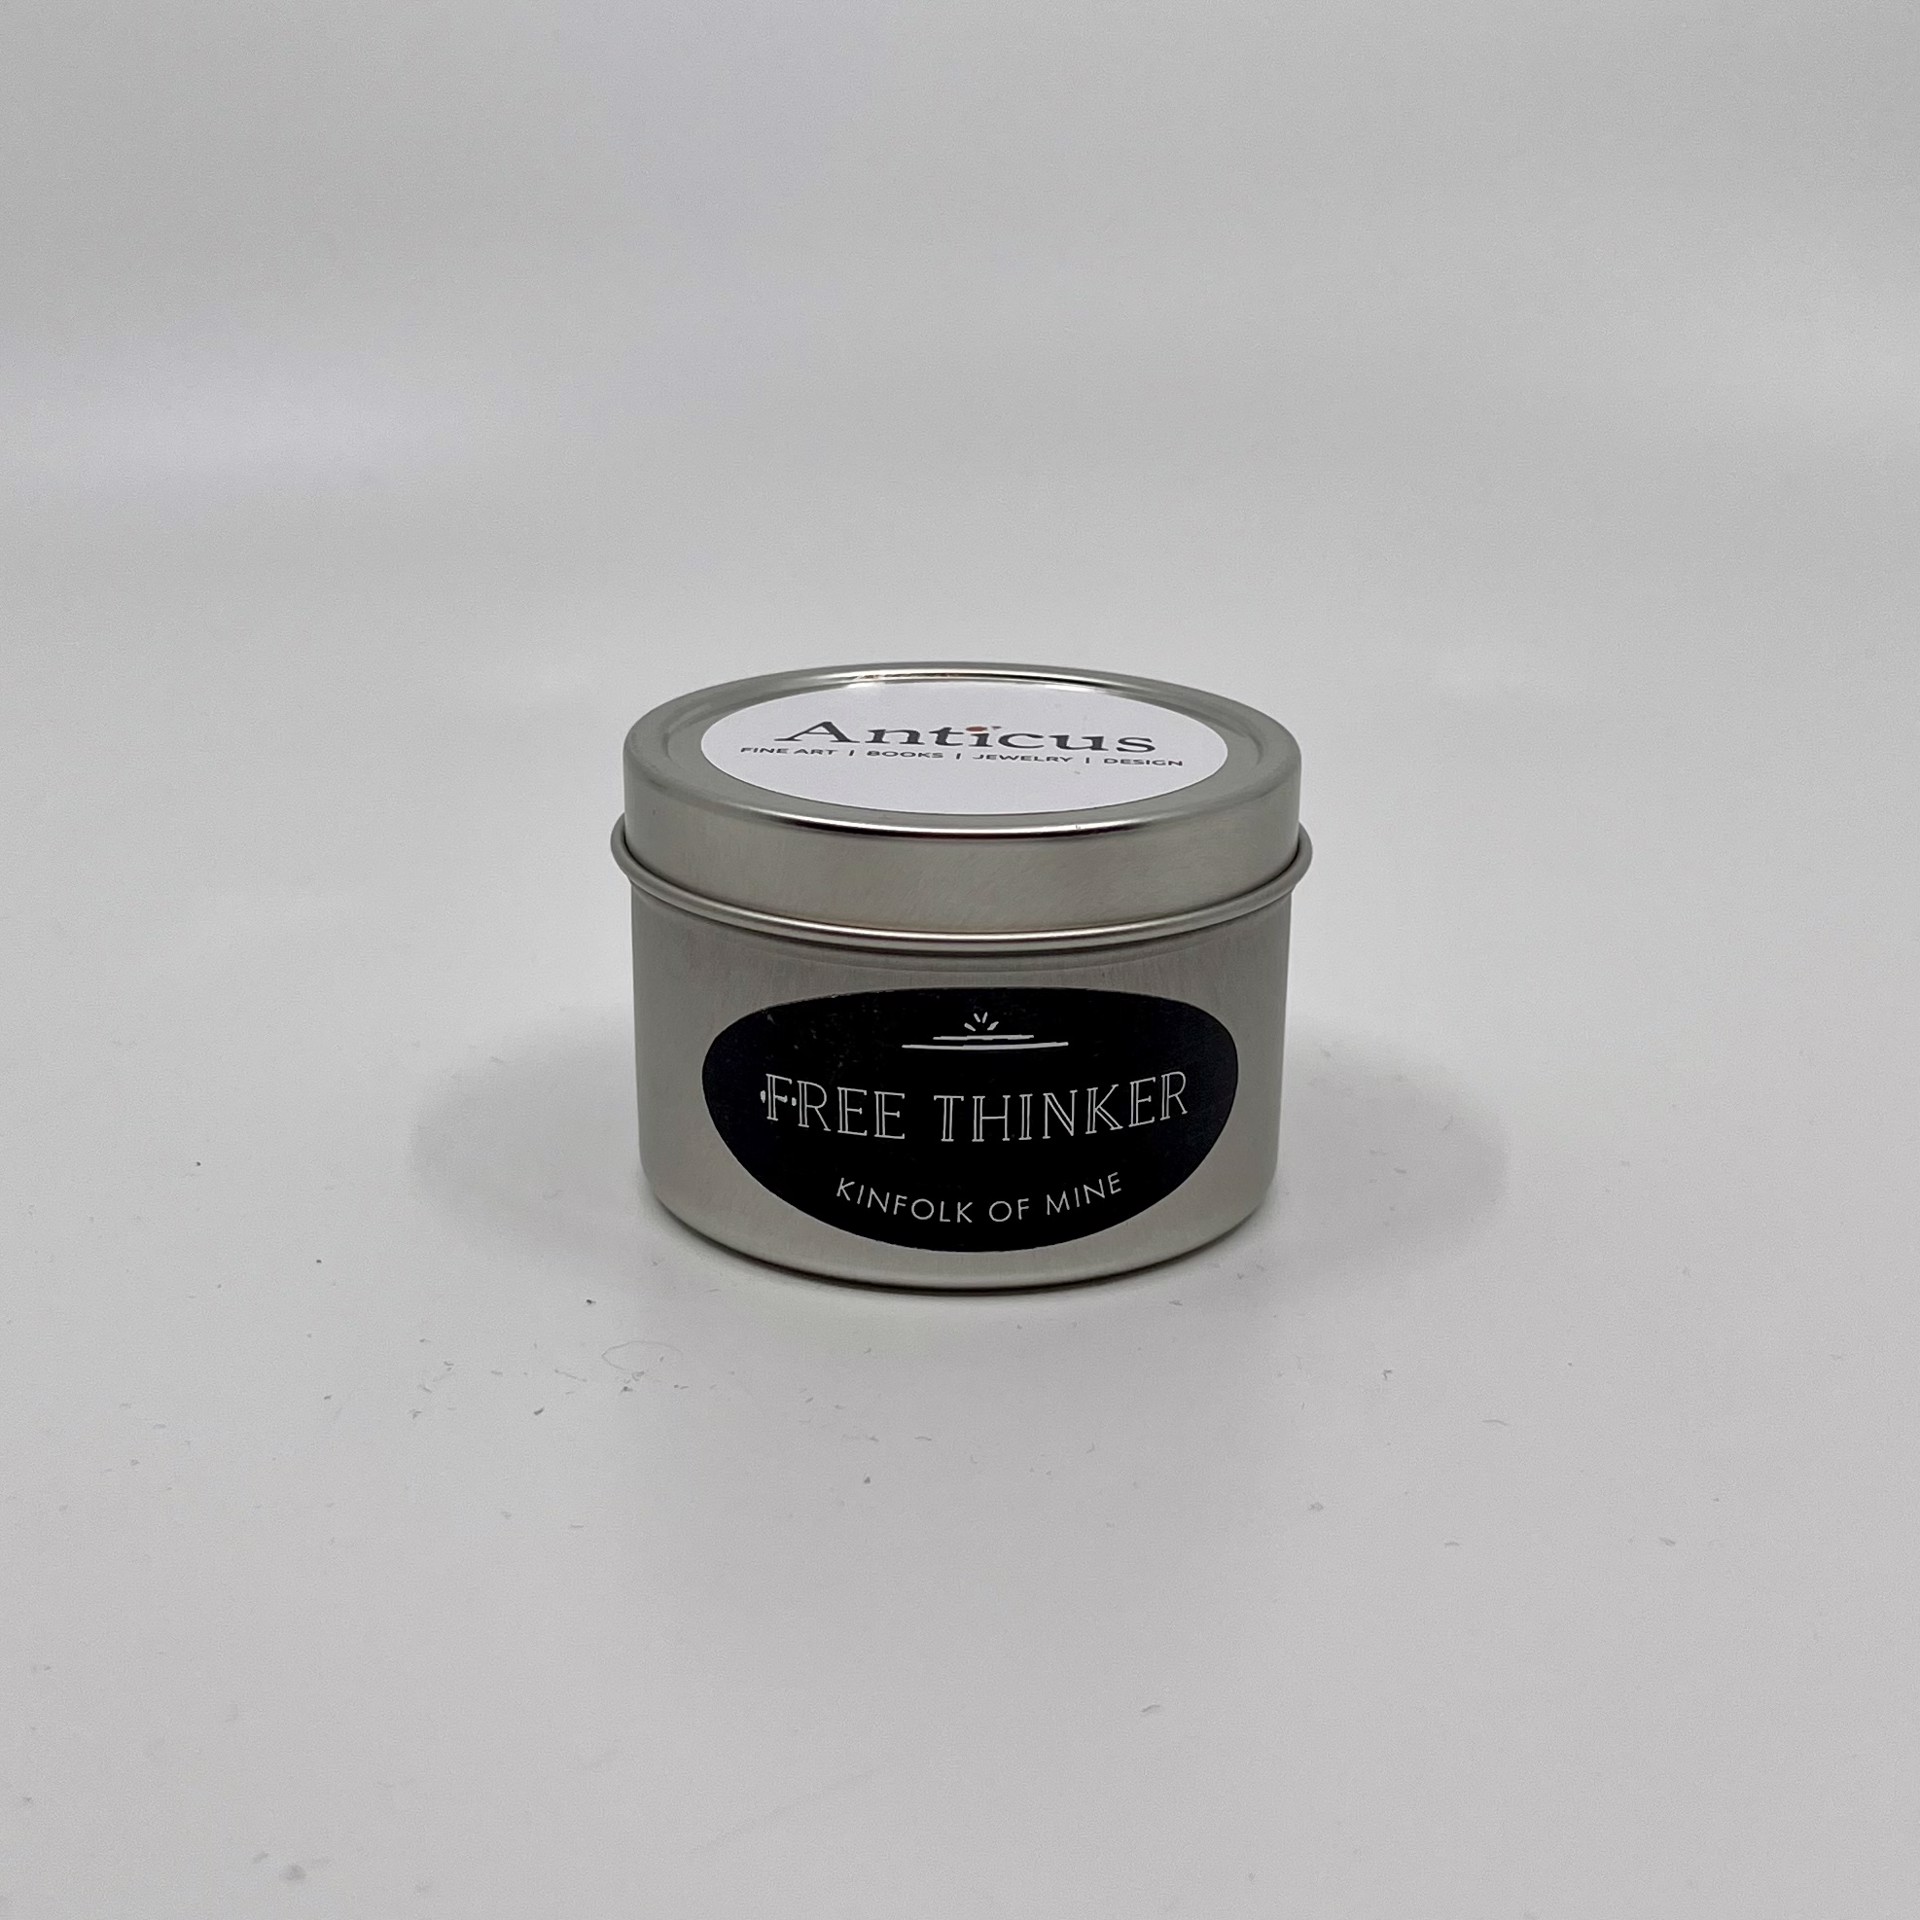 KMTFT Free Thinker 4oz Tin by Anticus Candle